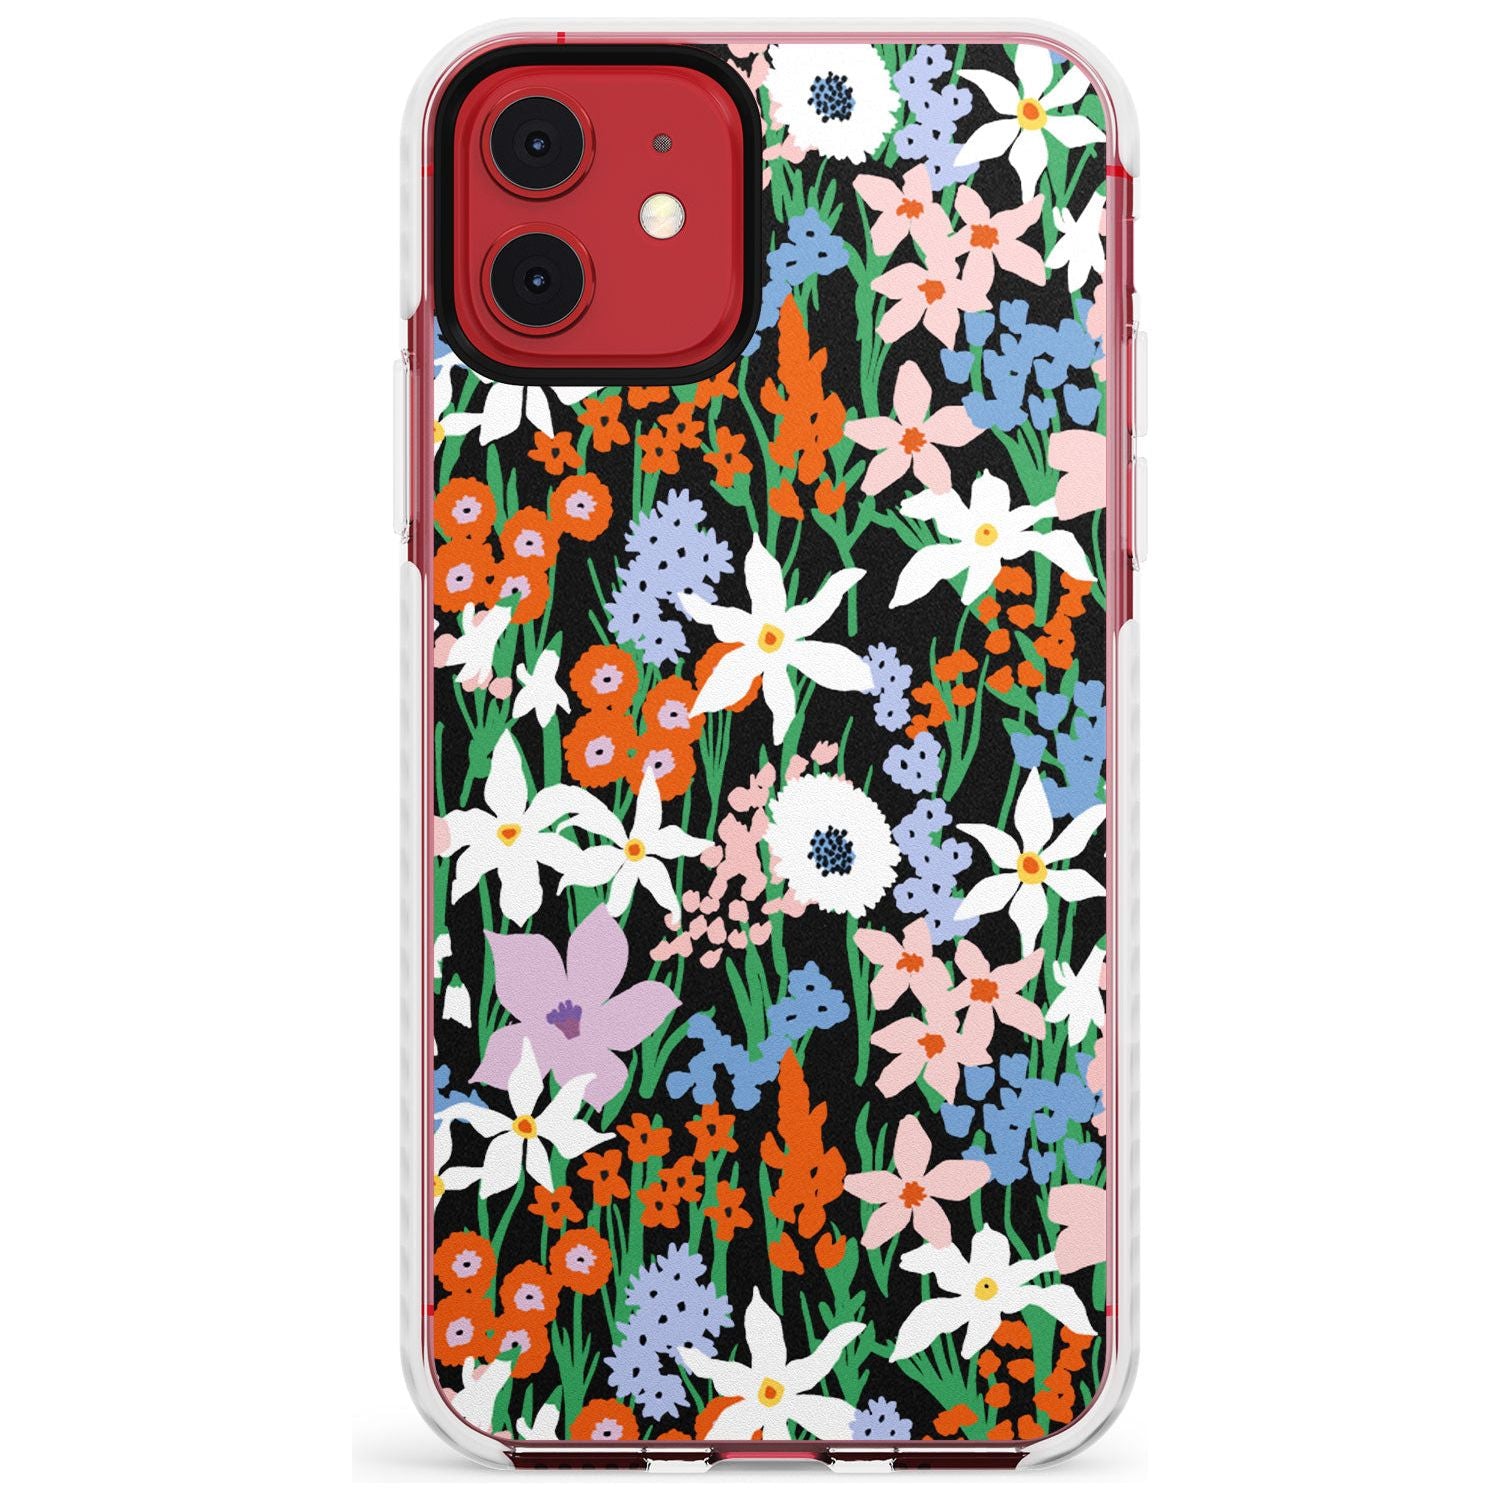 Springtime Meadow: Solid Slim TPU Phone Case for iPhone 11